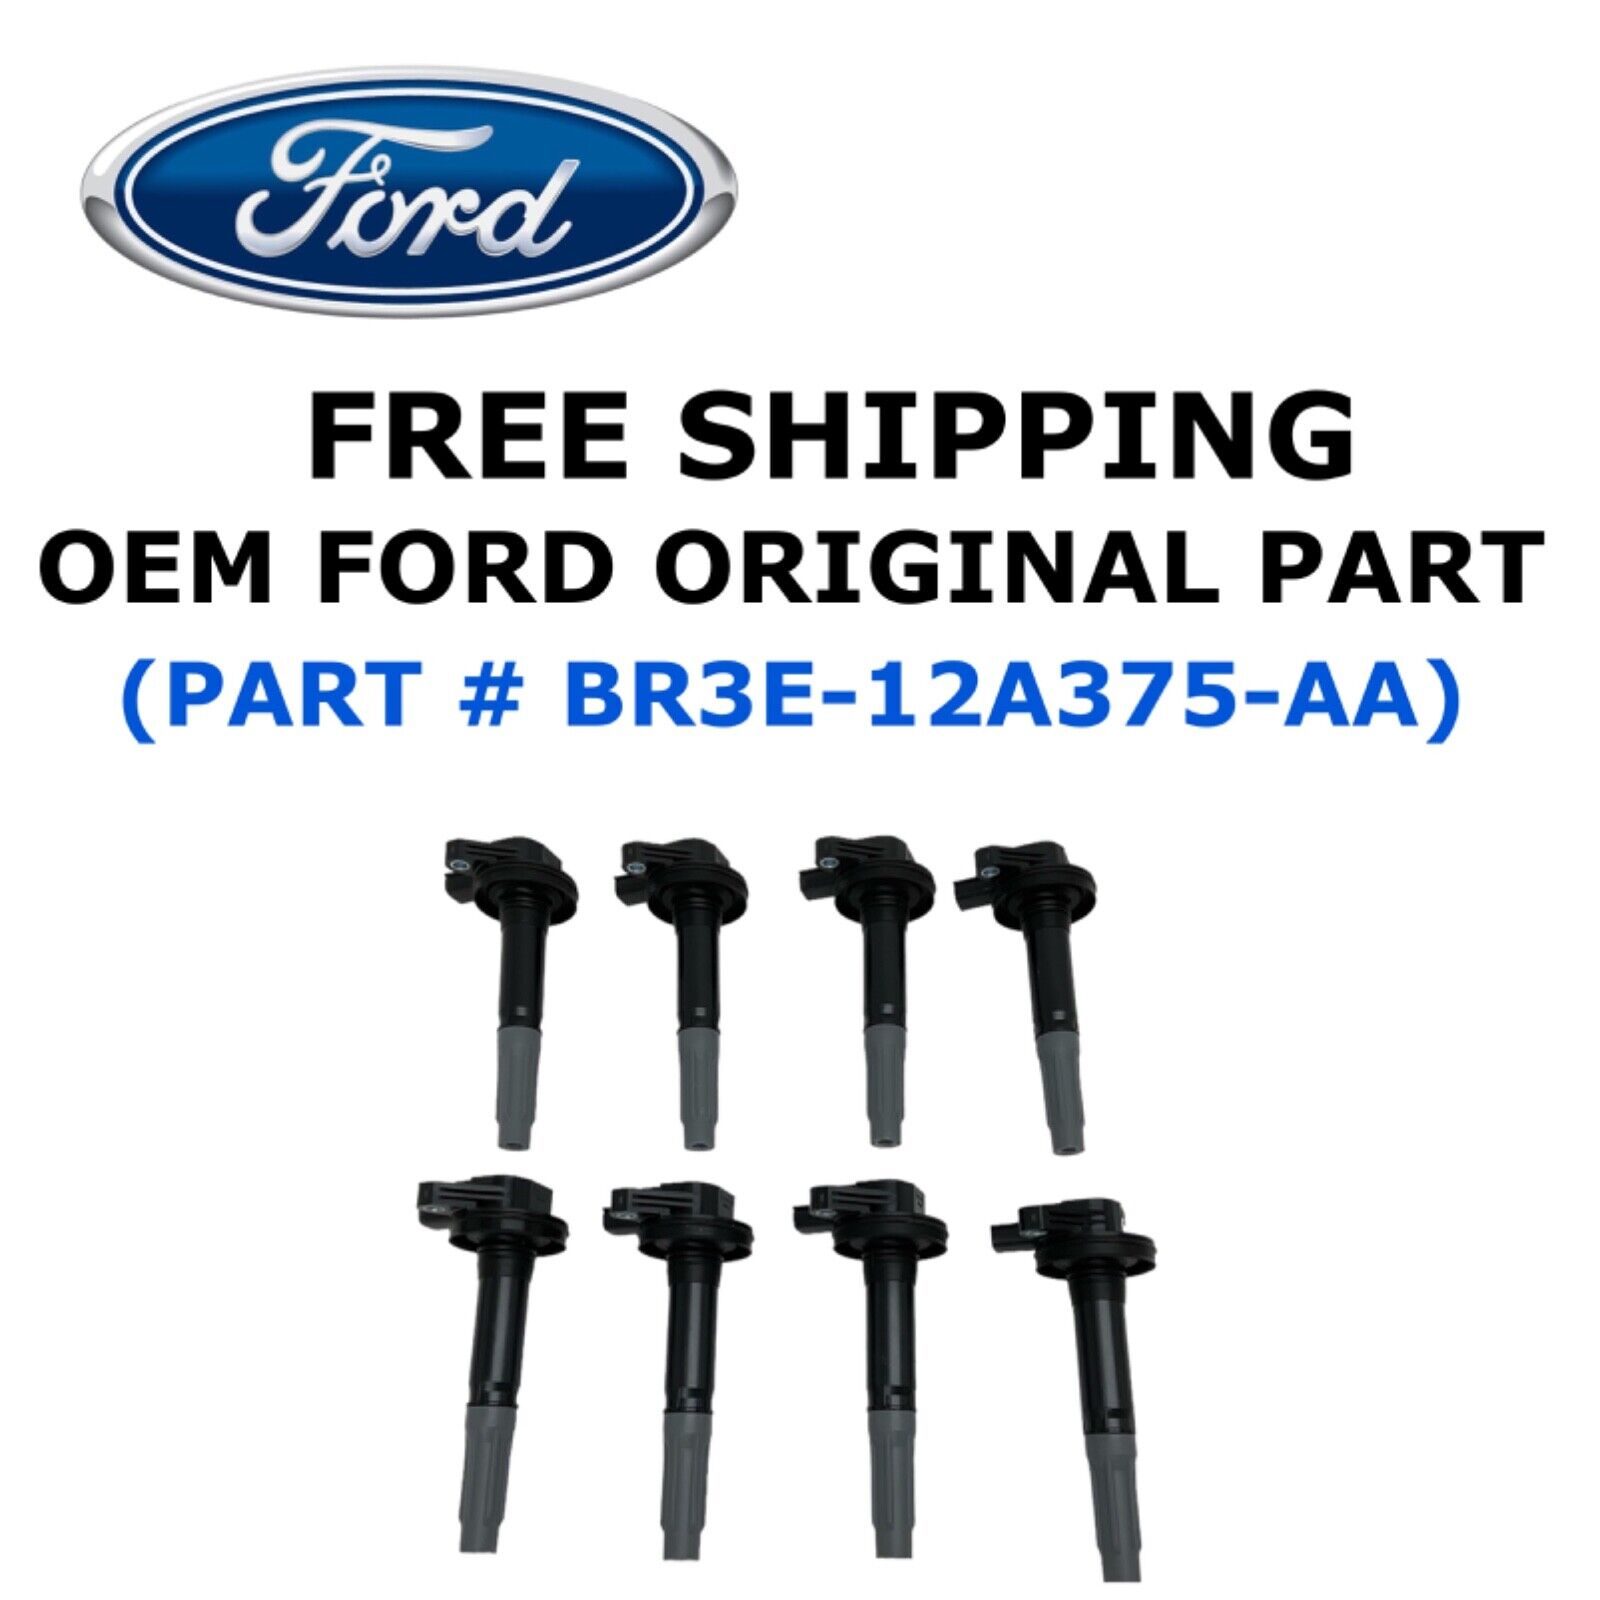 NEW SET OF 8 Ignition Coil For Ford F-150 Mustang 5.0L V8 2011-2016 ORIGINAL